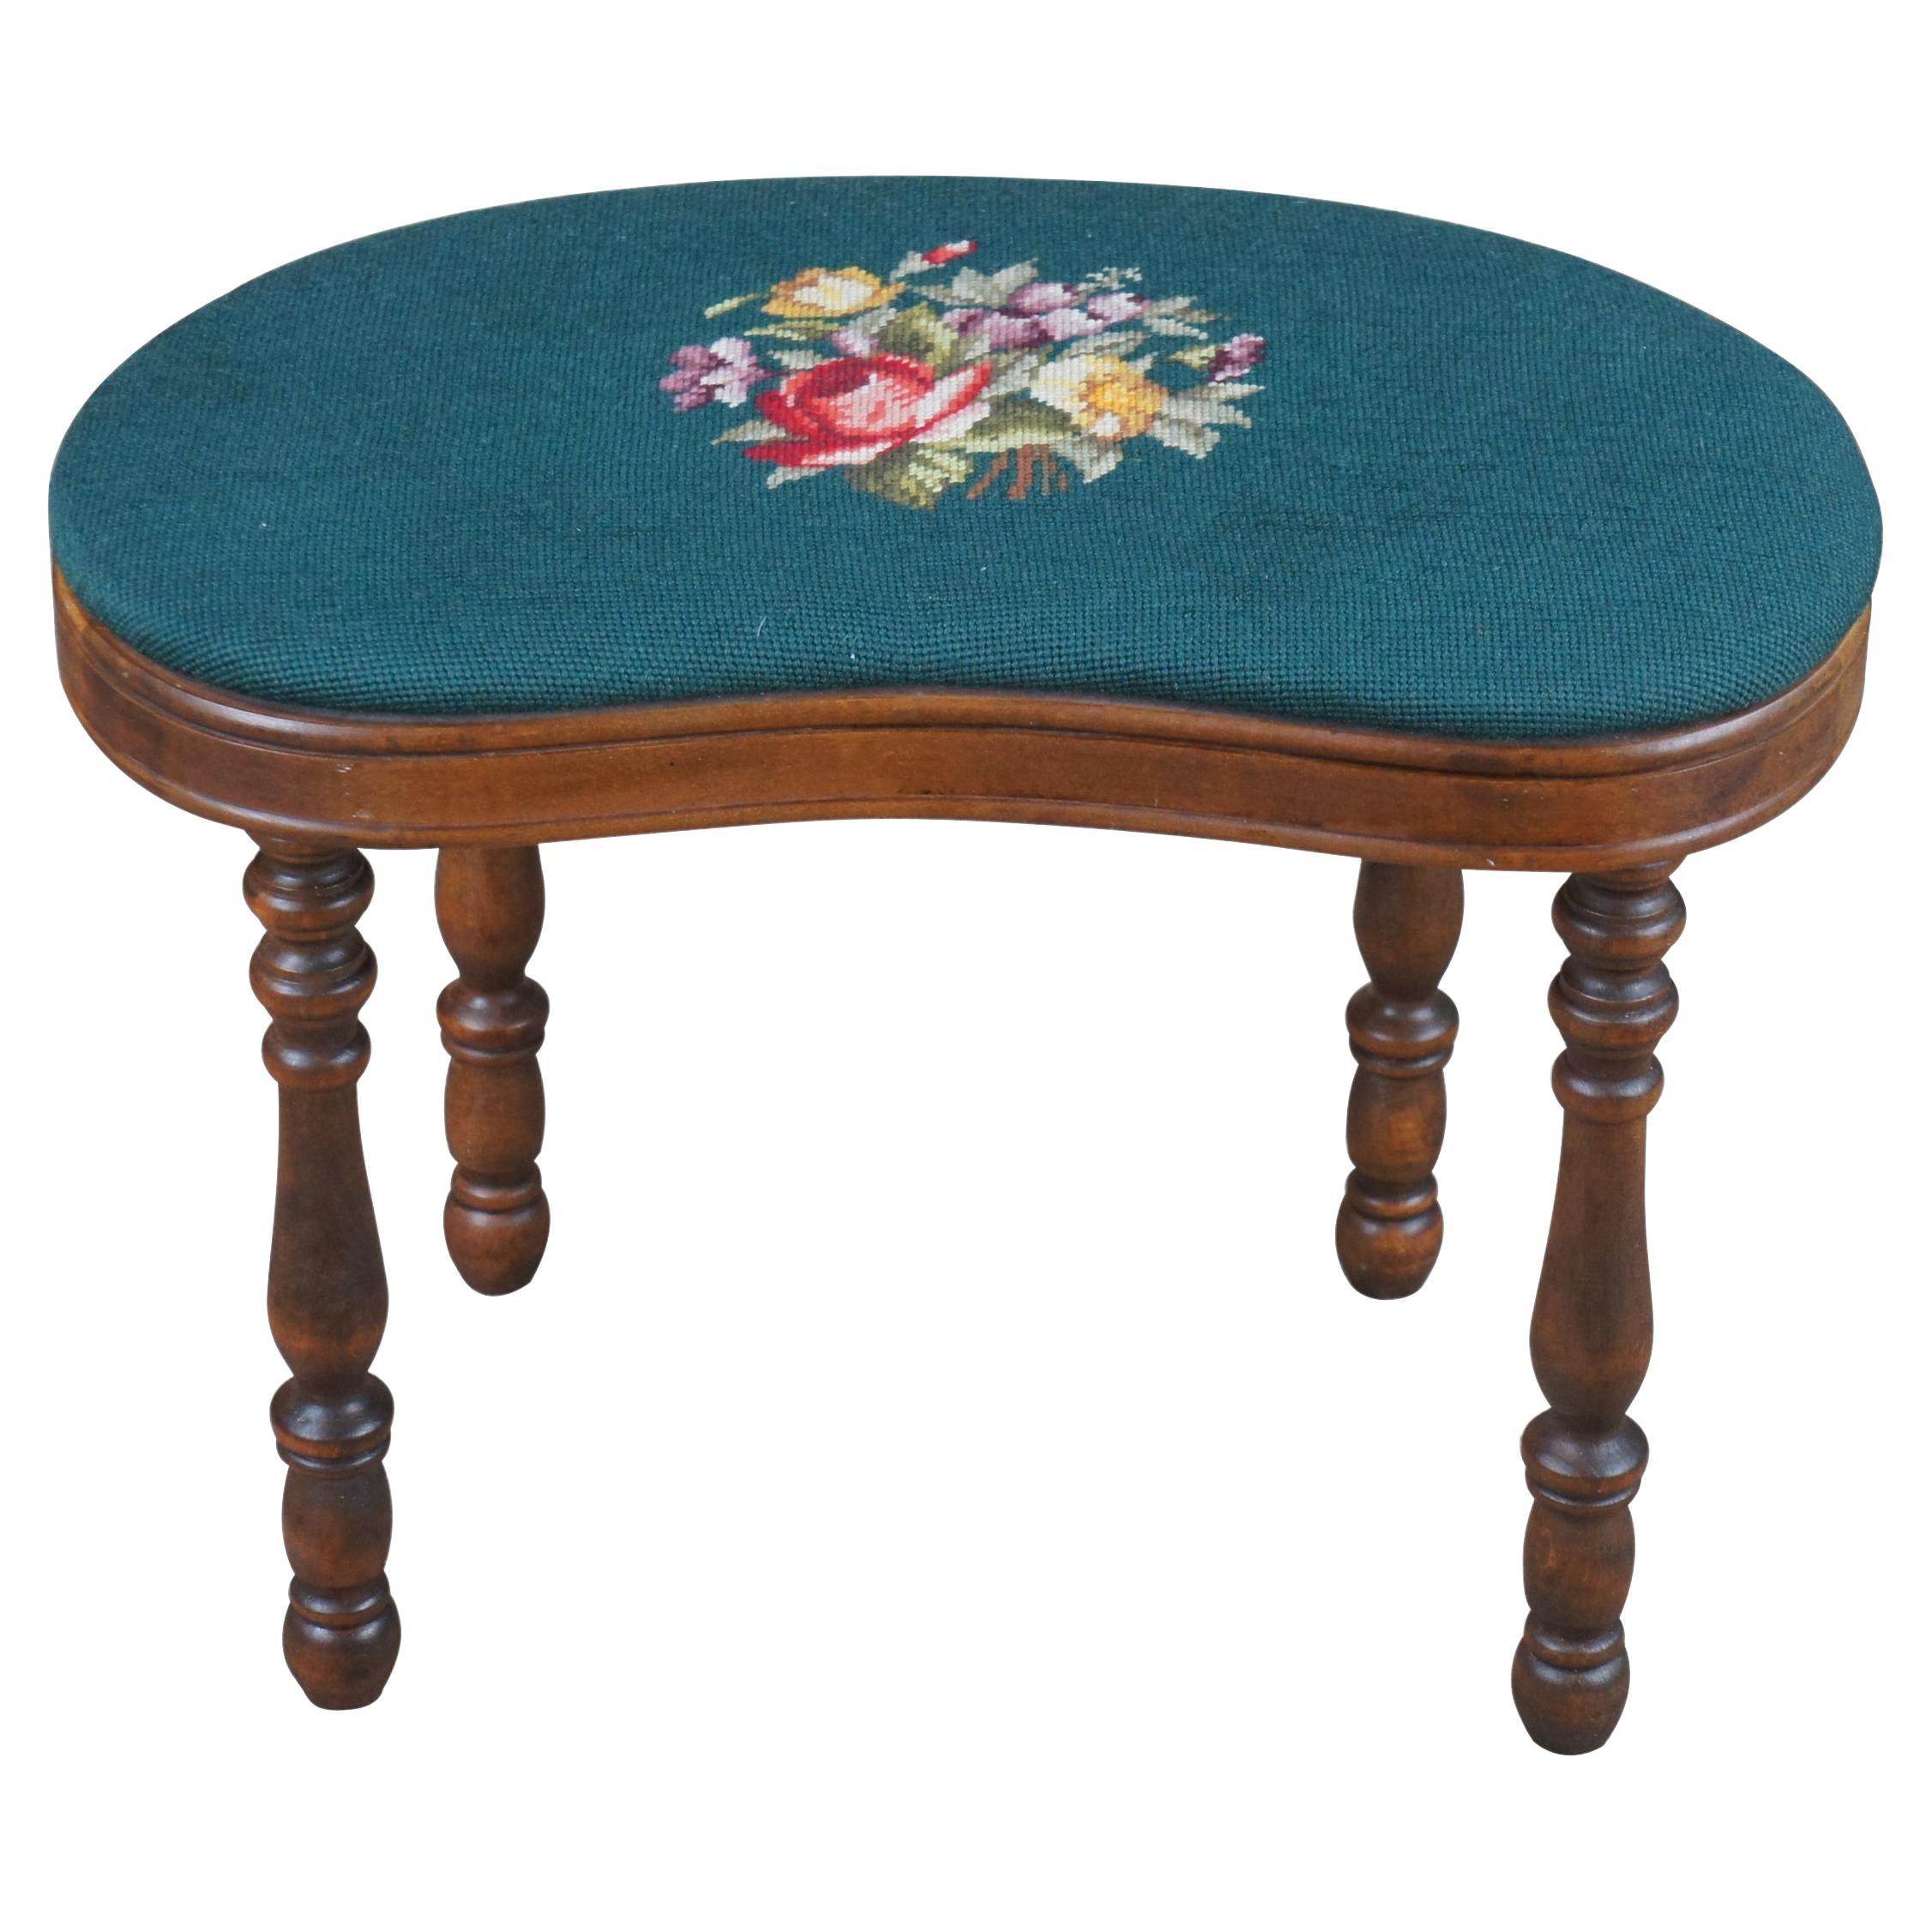 Mid Century Kidney Bean Green Floral Embroidered Foot Stool Piano Bench Ottoman For Sale